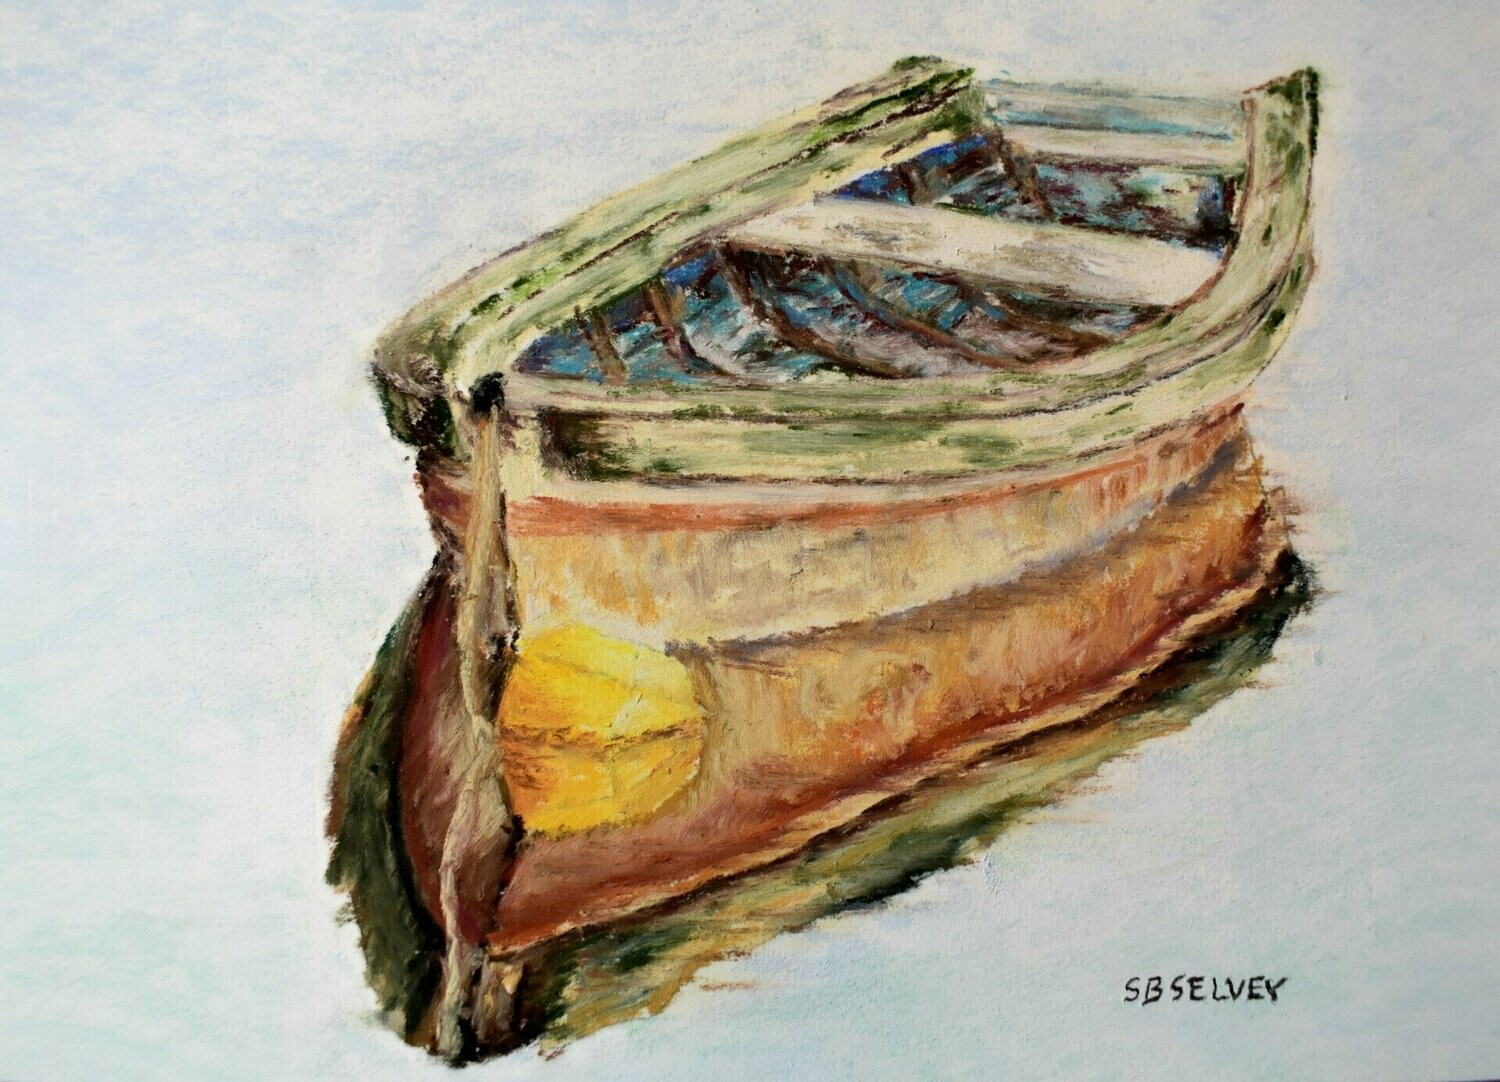 "Whatever Floats" by Sue Selvey